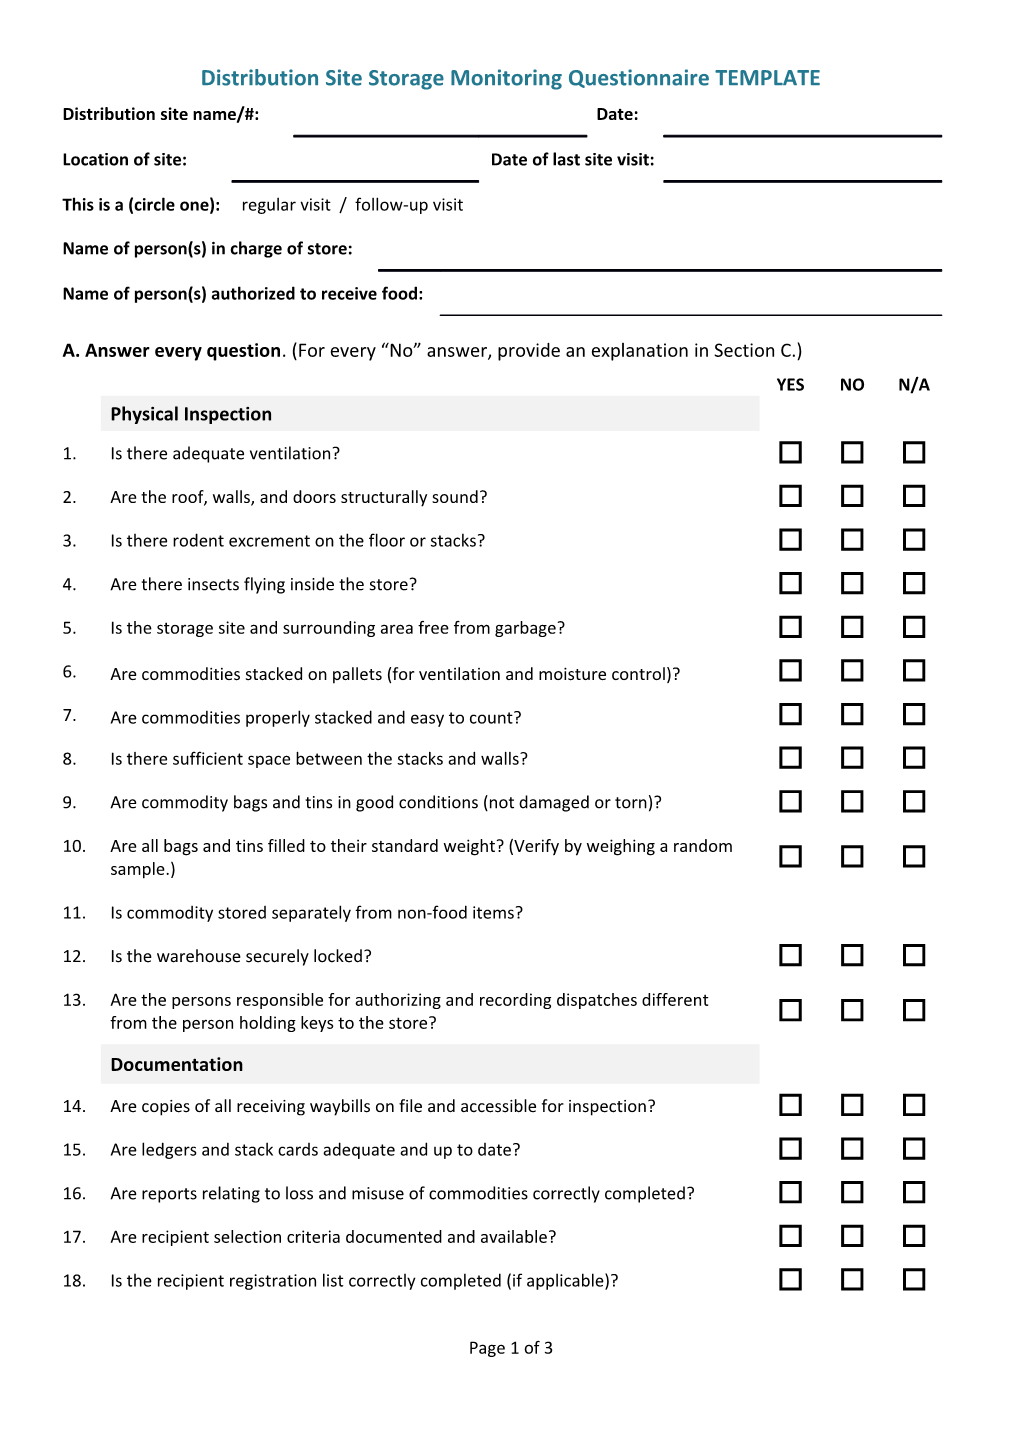 Distribution Site Storage Monitoring Questionnaire TEMPLATE